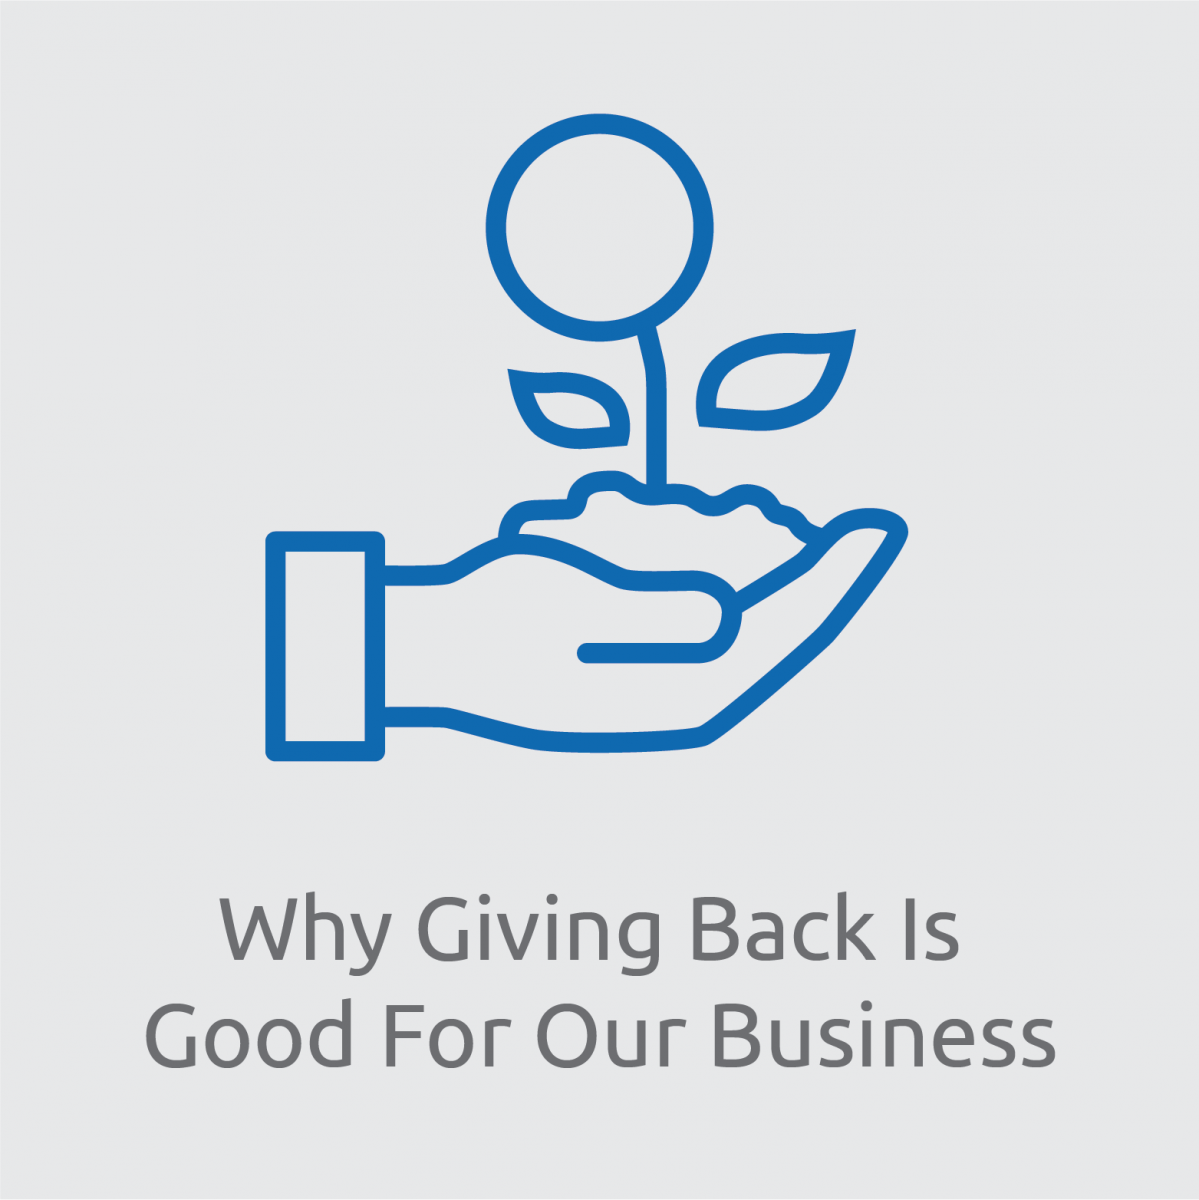 Why Giving Back is Good for Our Business